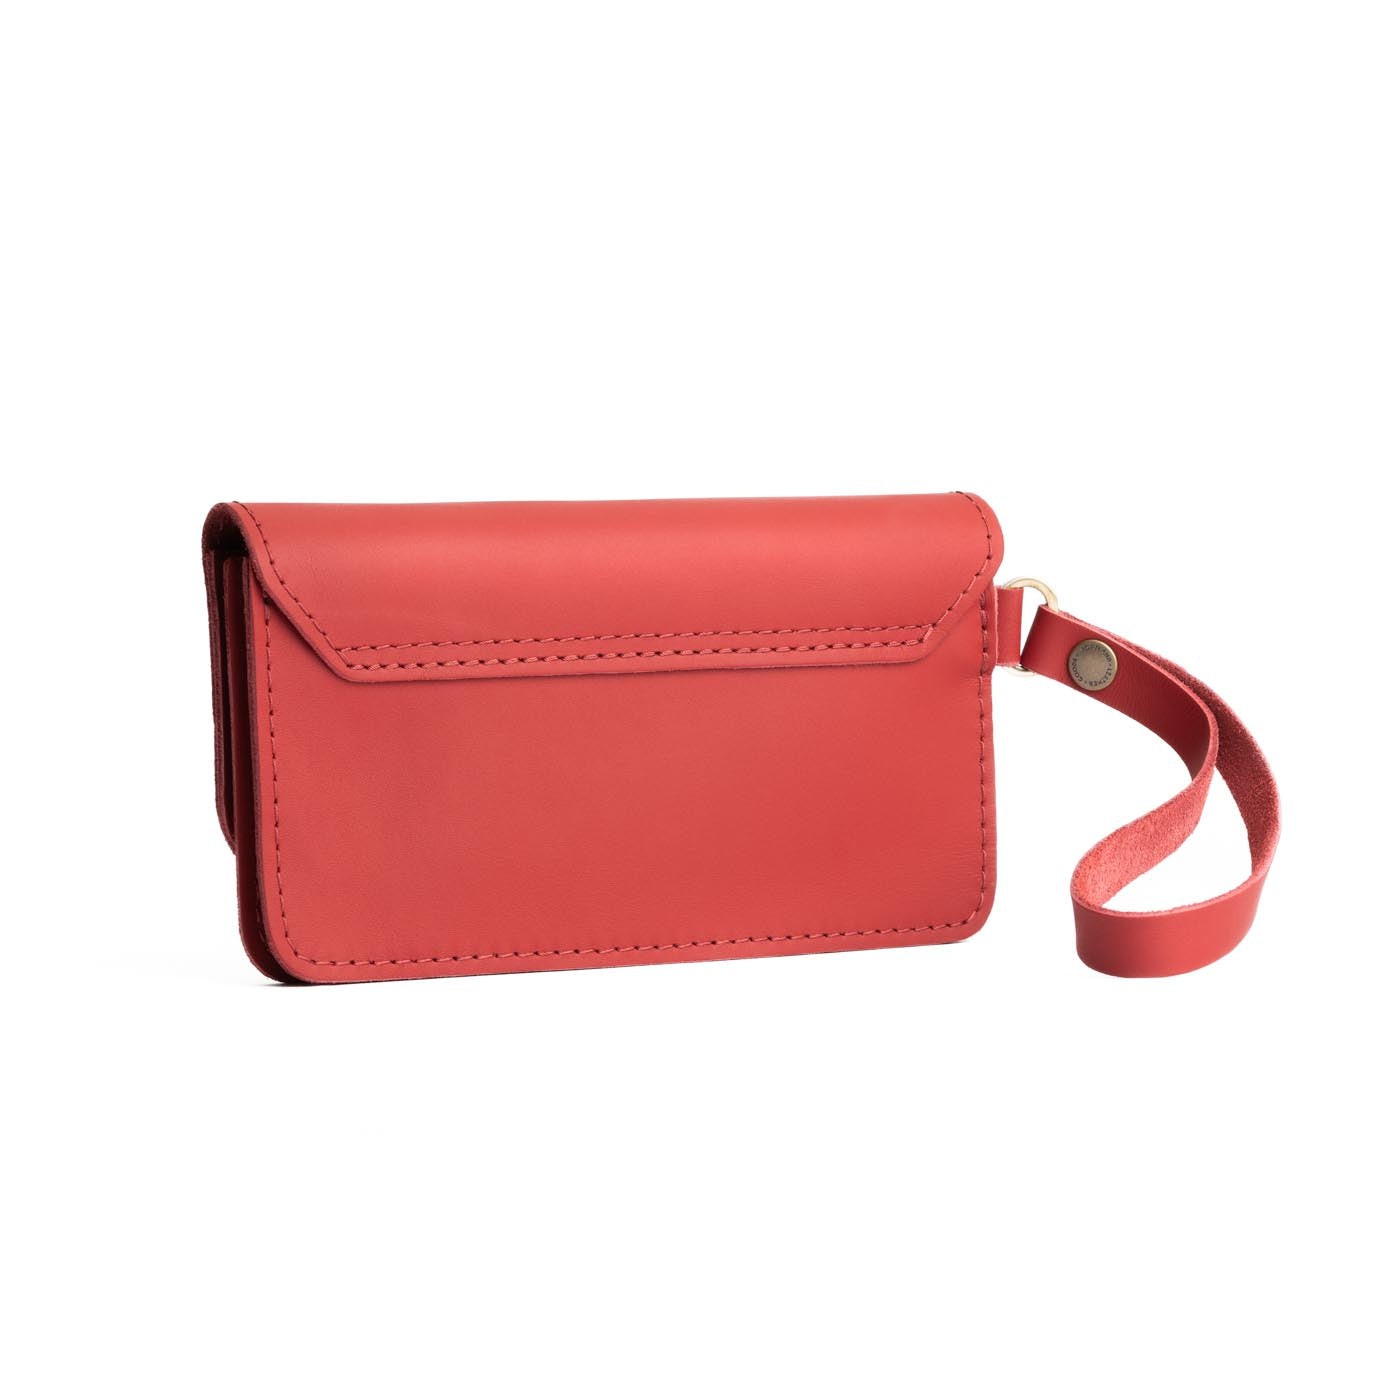 'Almost Perfect' Lily Wristlet